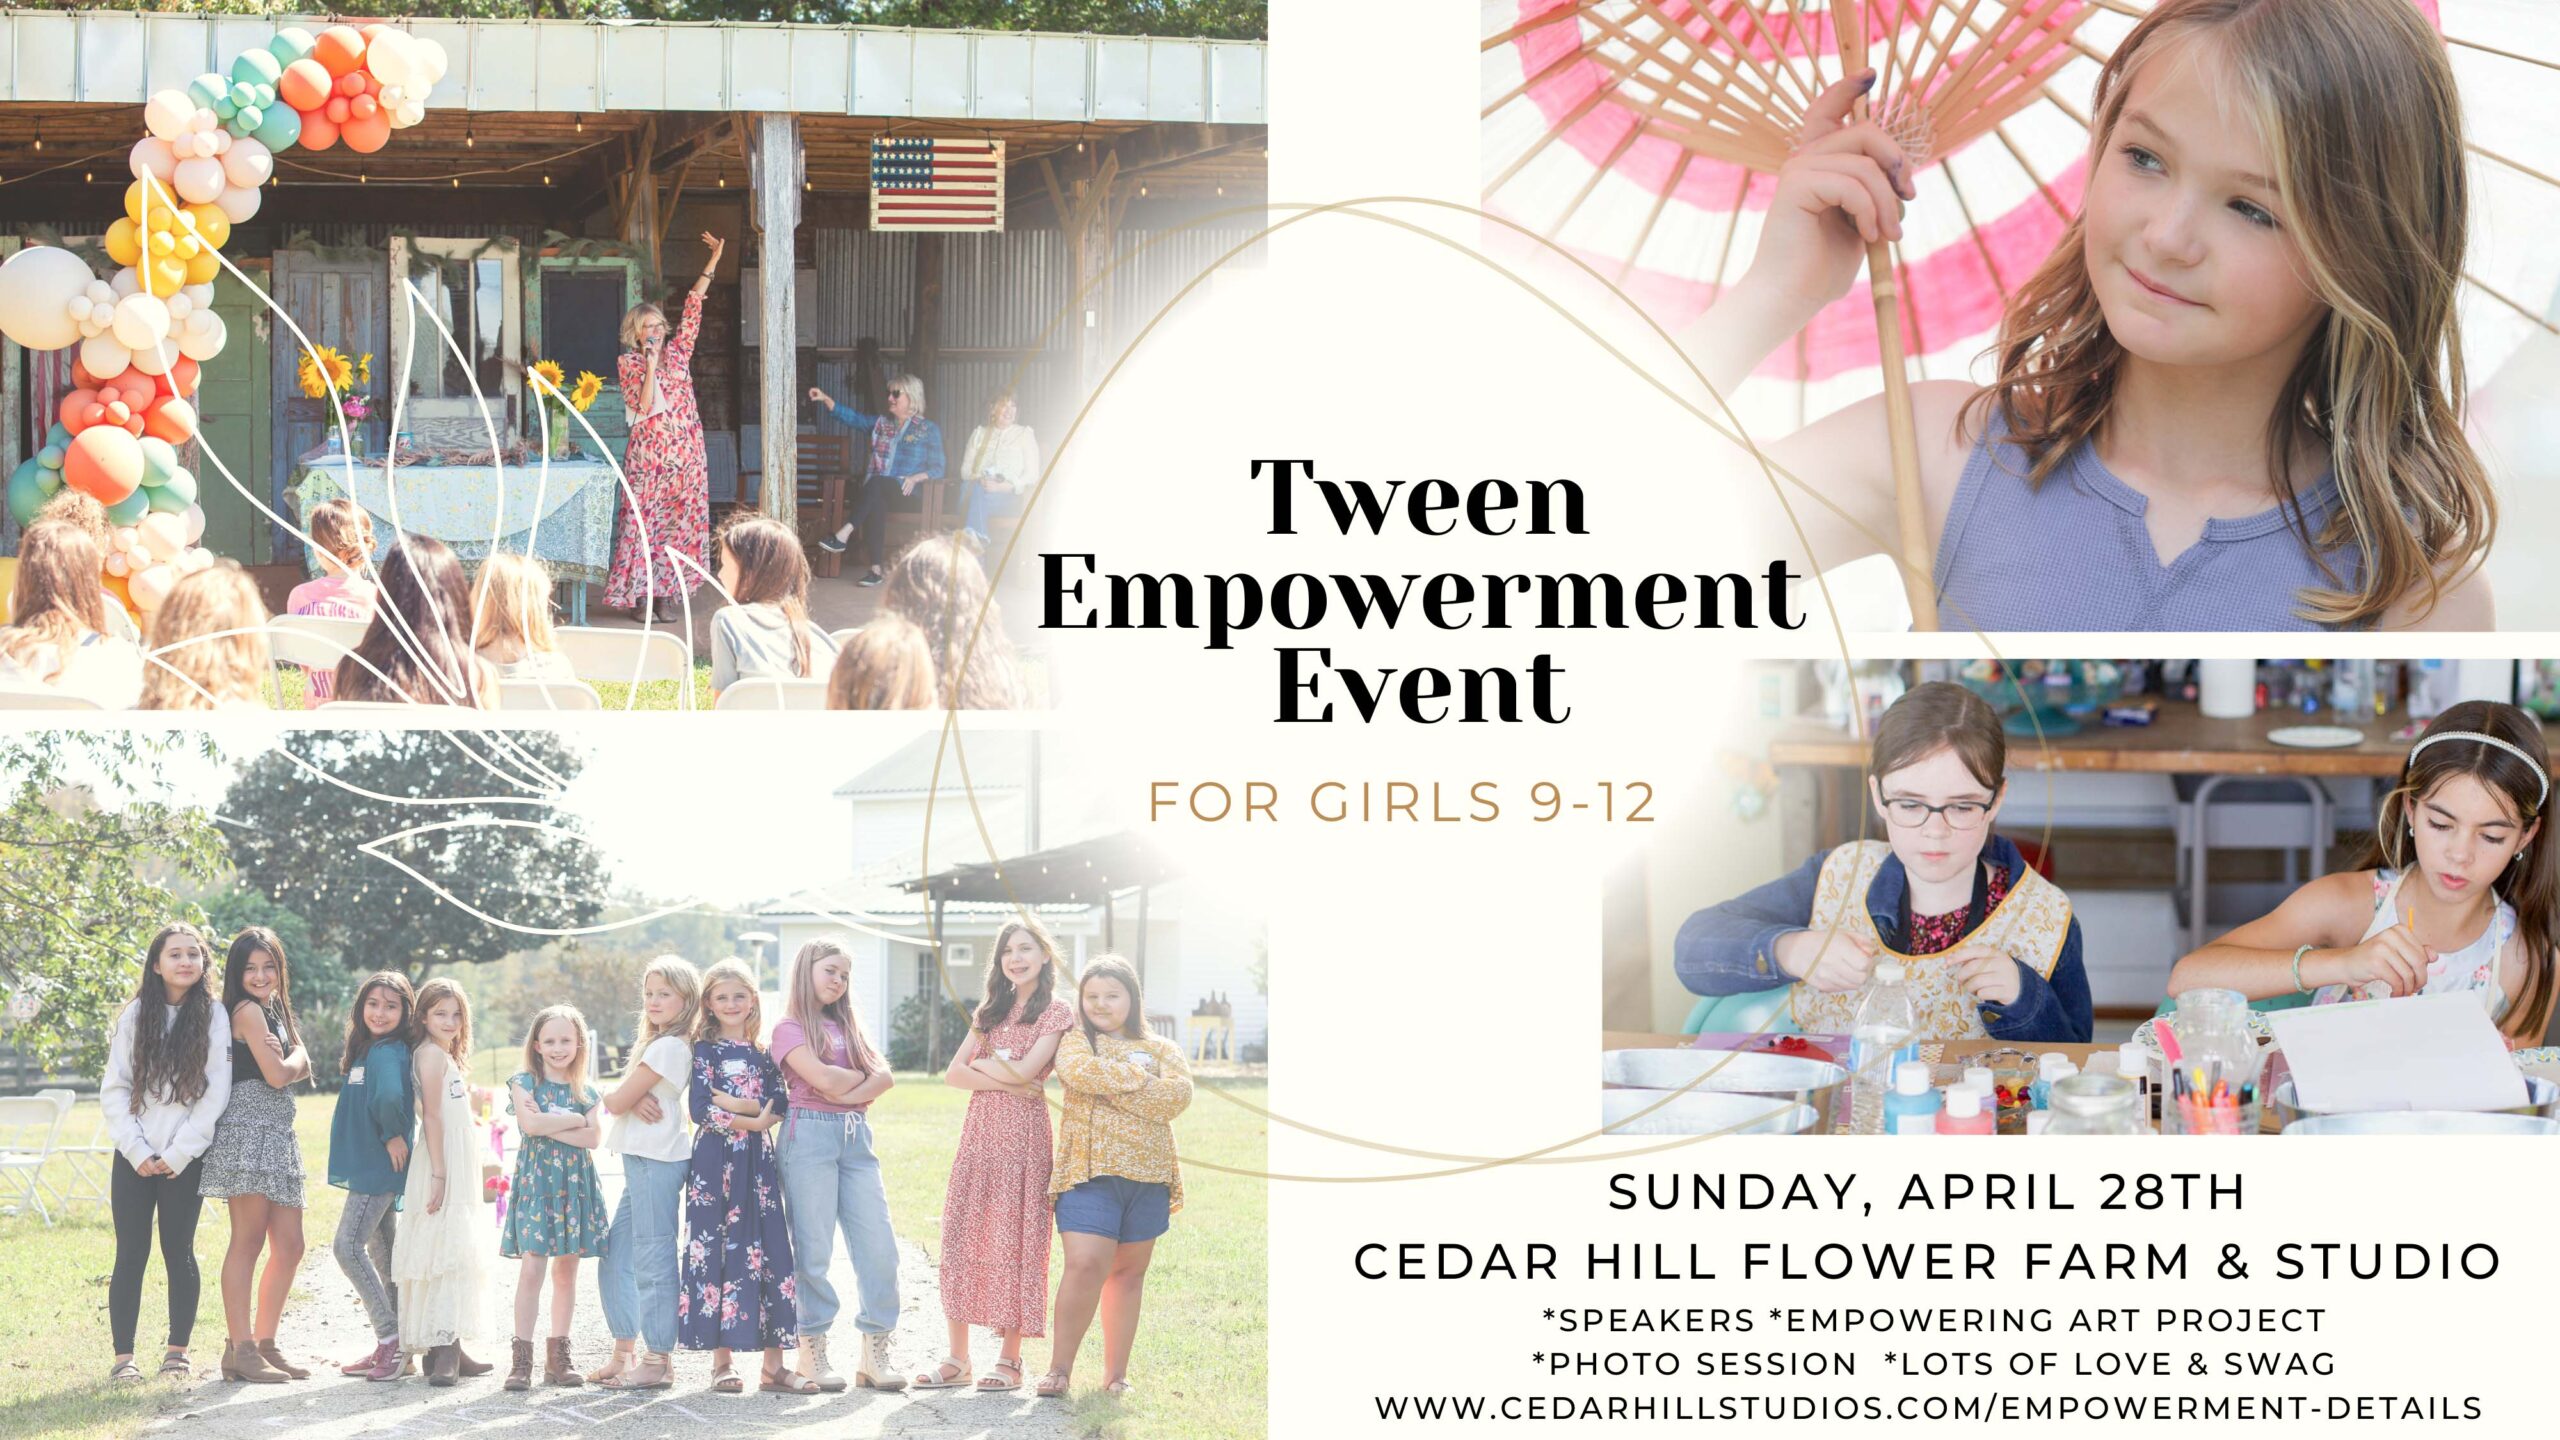 Tween Empowerment Event for girls 9-12 years old